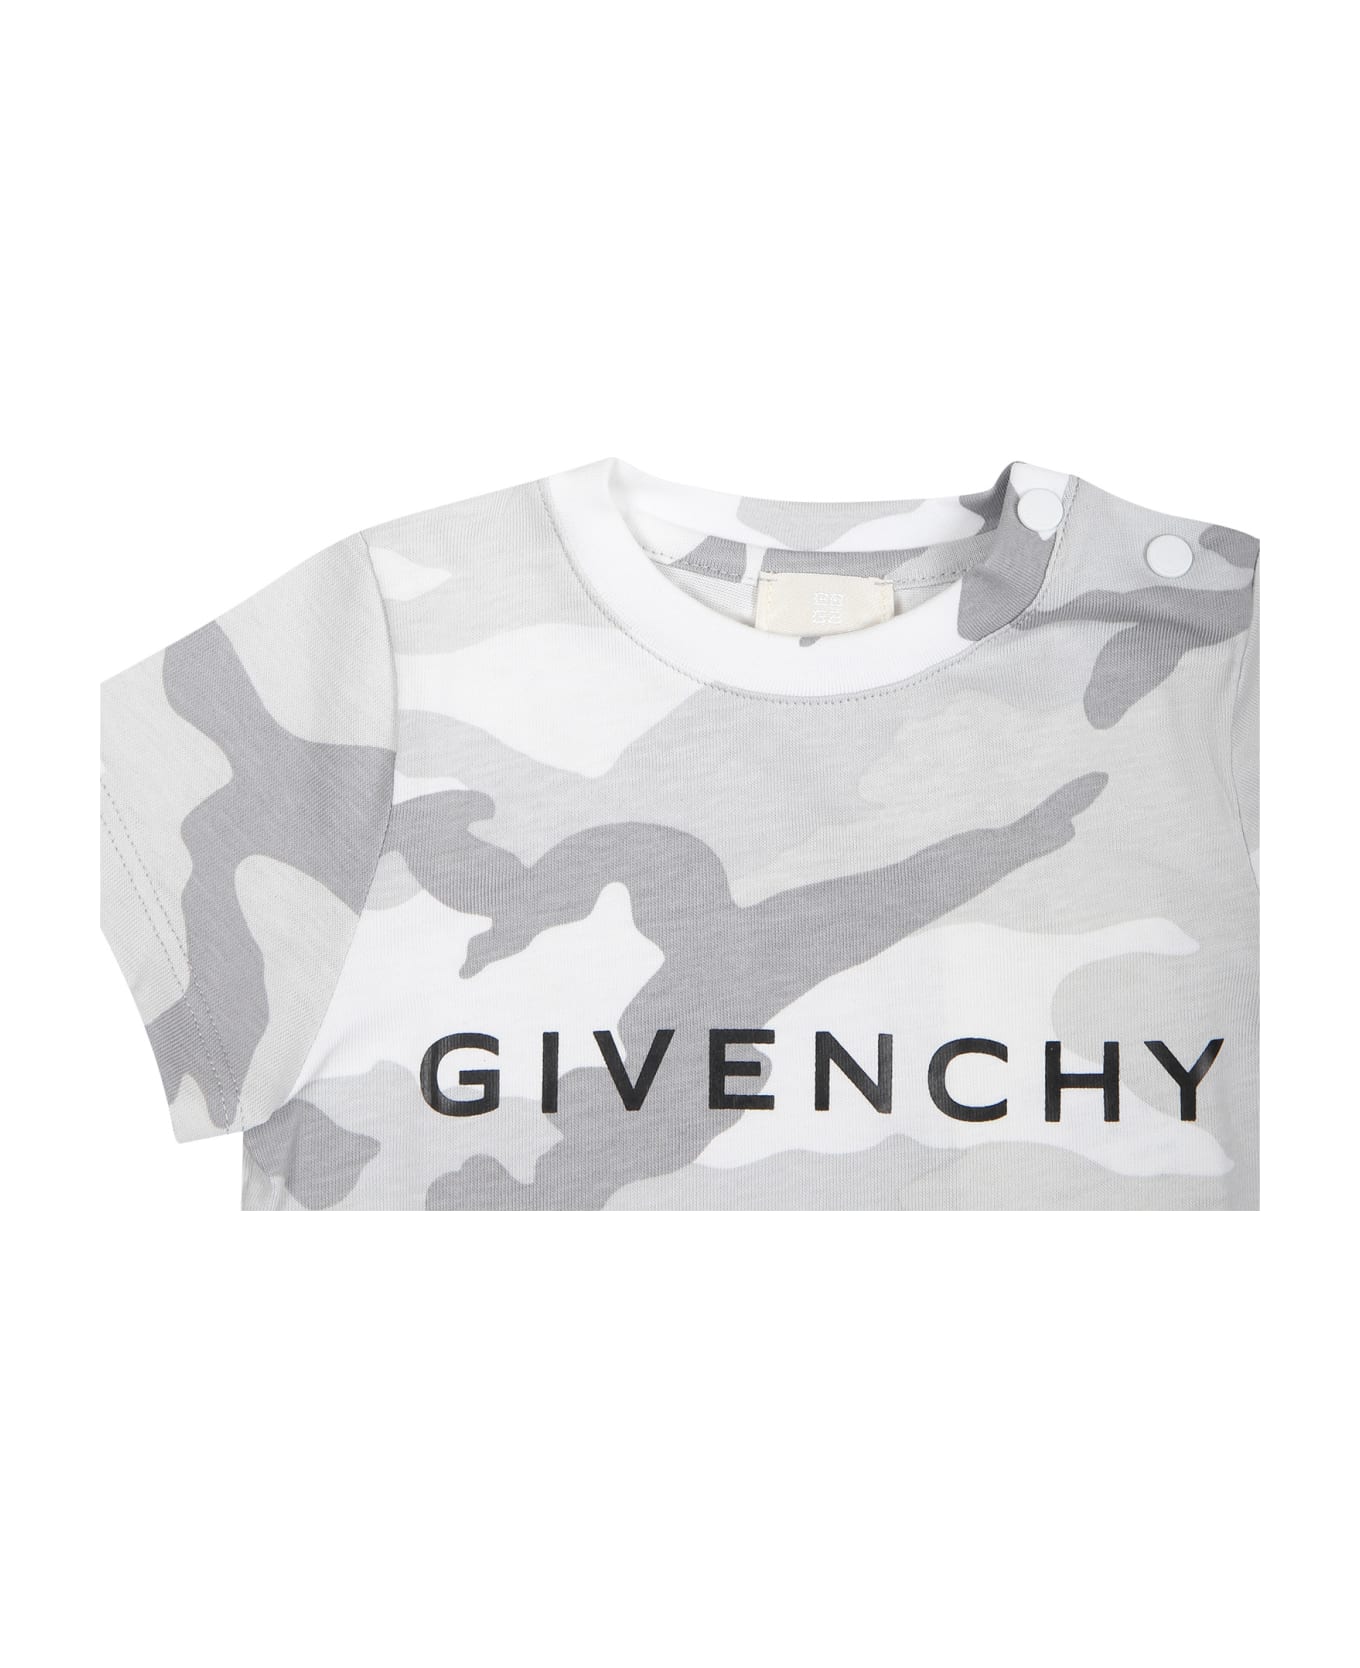 Givenchy Gray T-shirt For Baby Boy With Camouflage Print - Grey